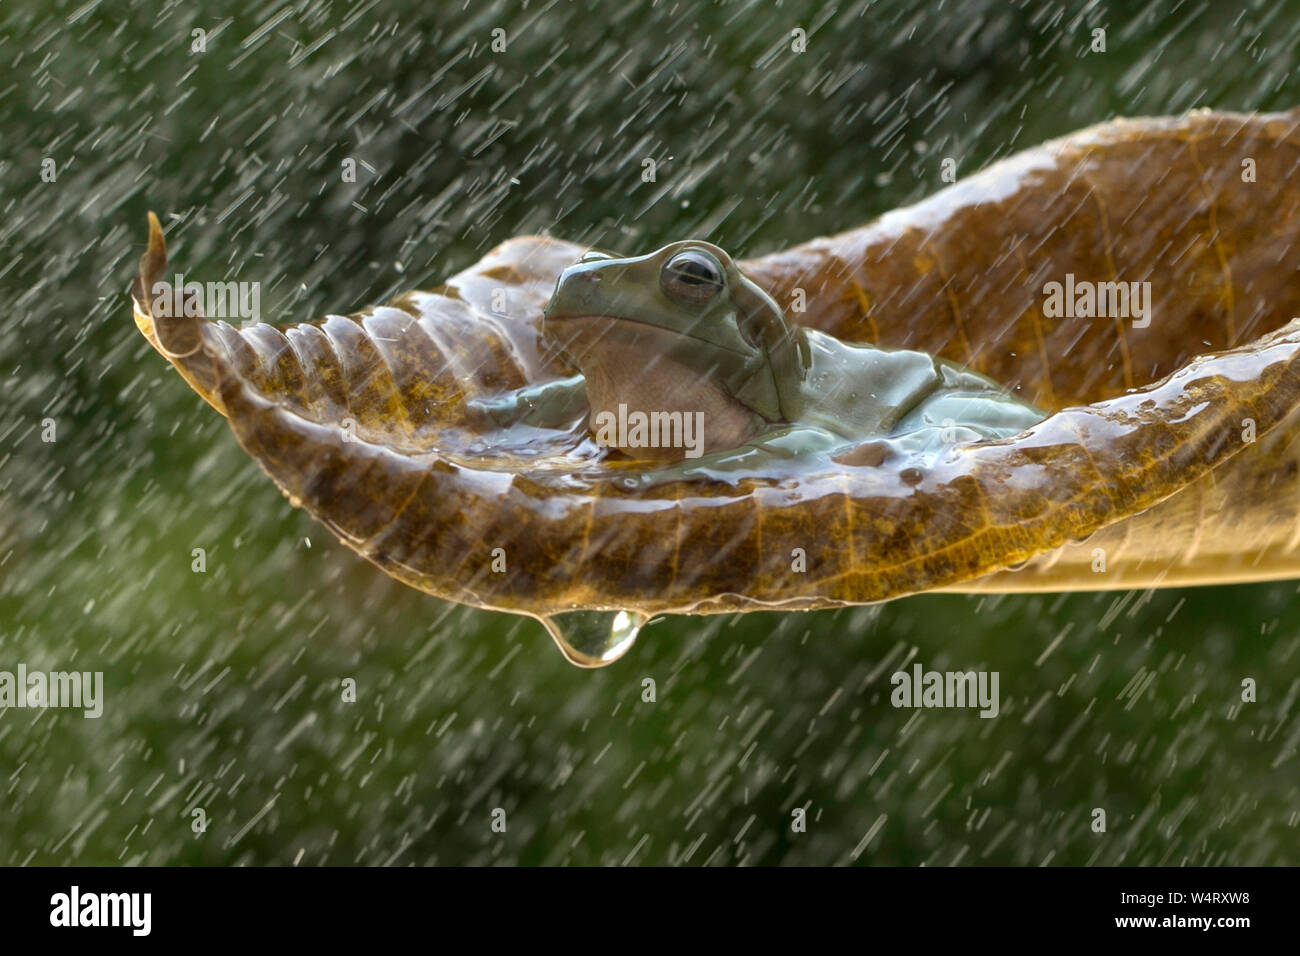 Frog sitting on a leaf in the rain, Indonesia Stock Photo